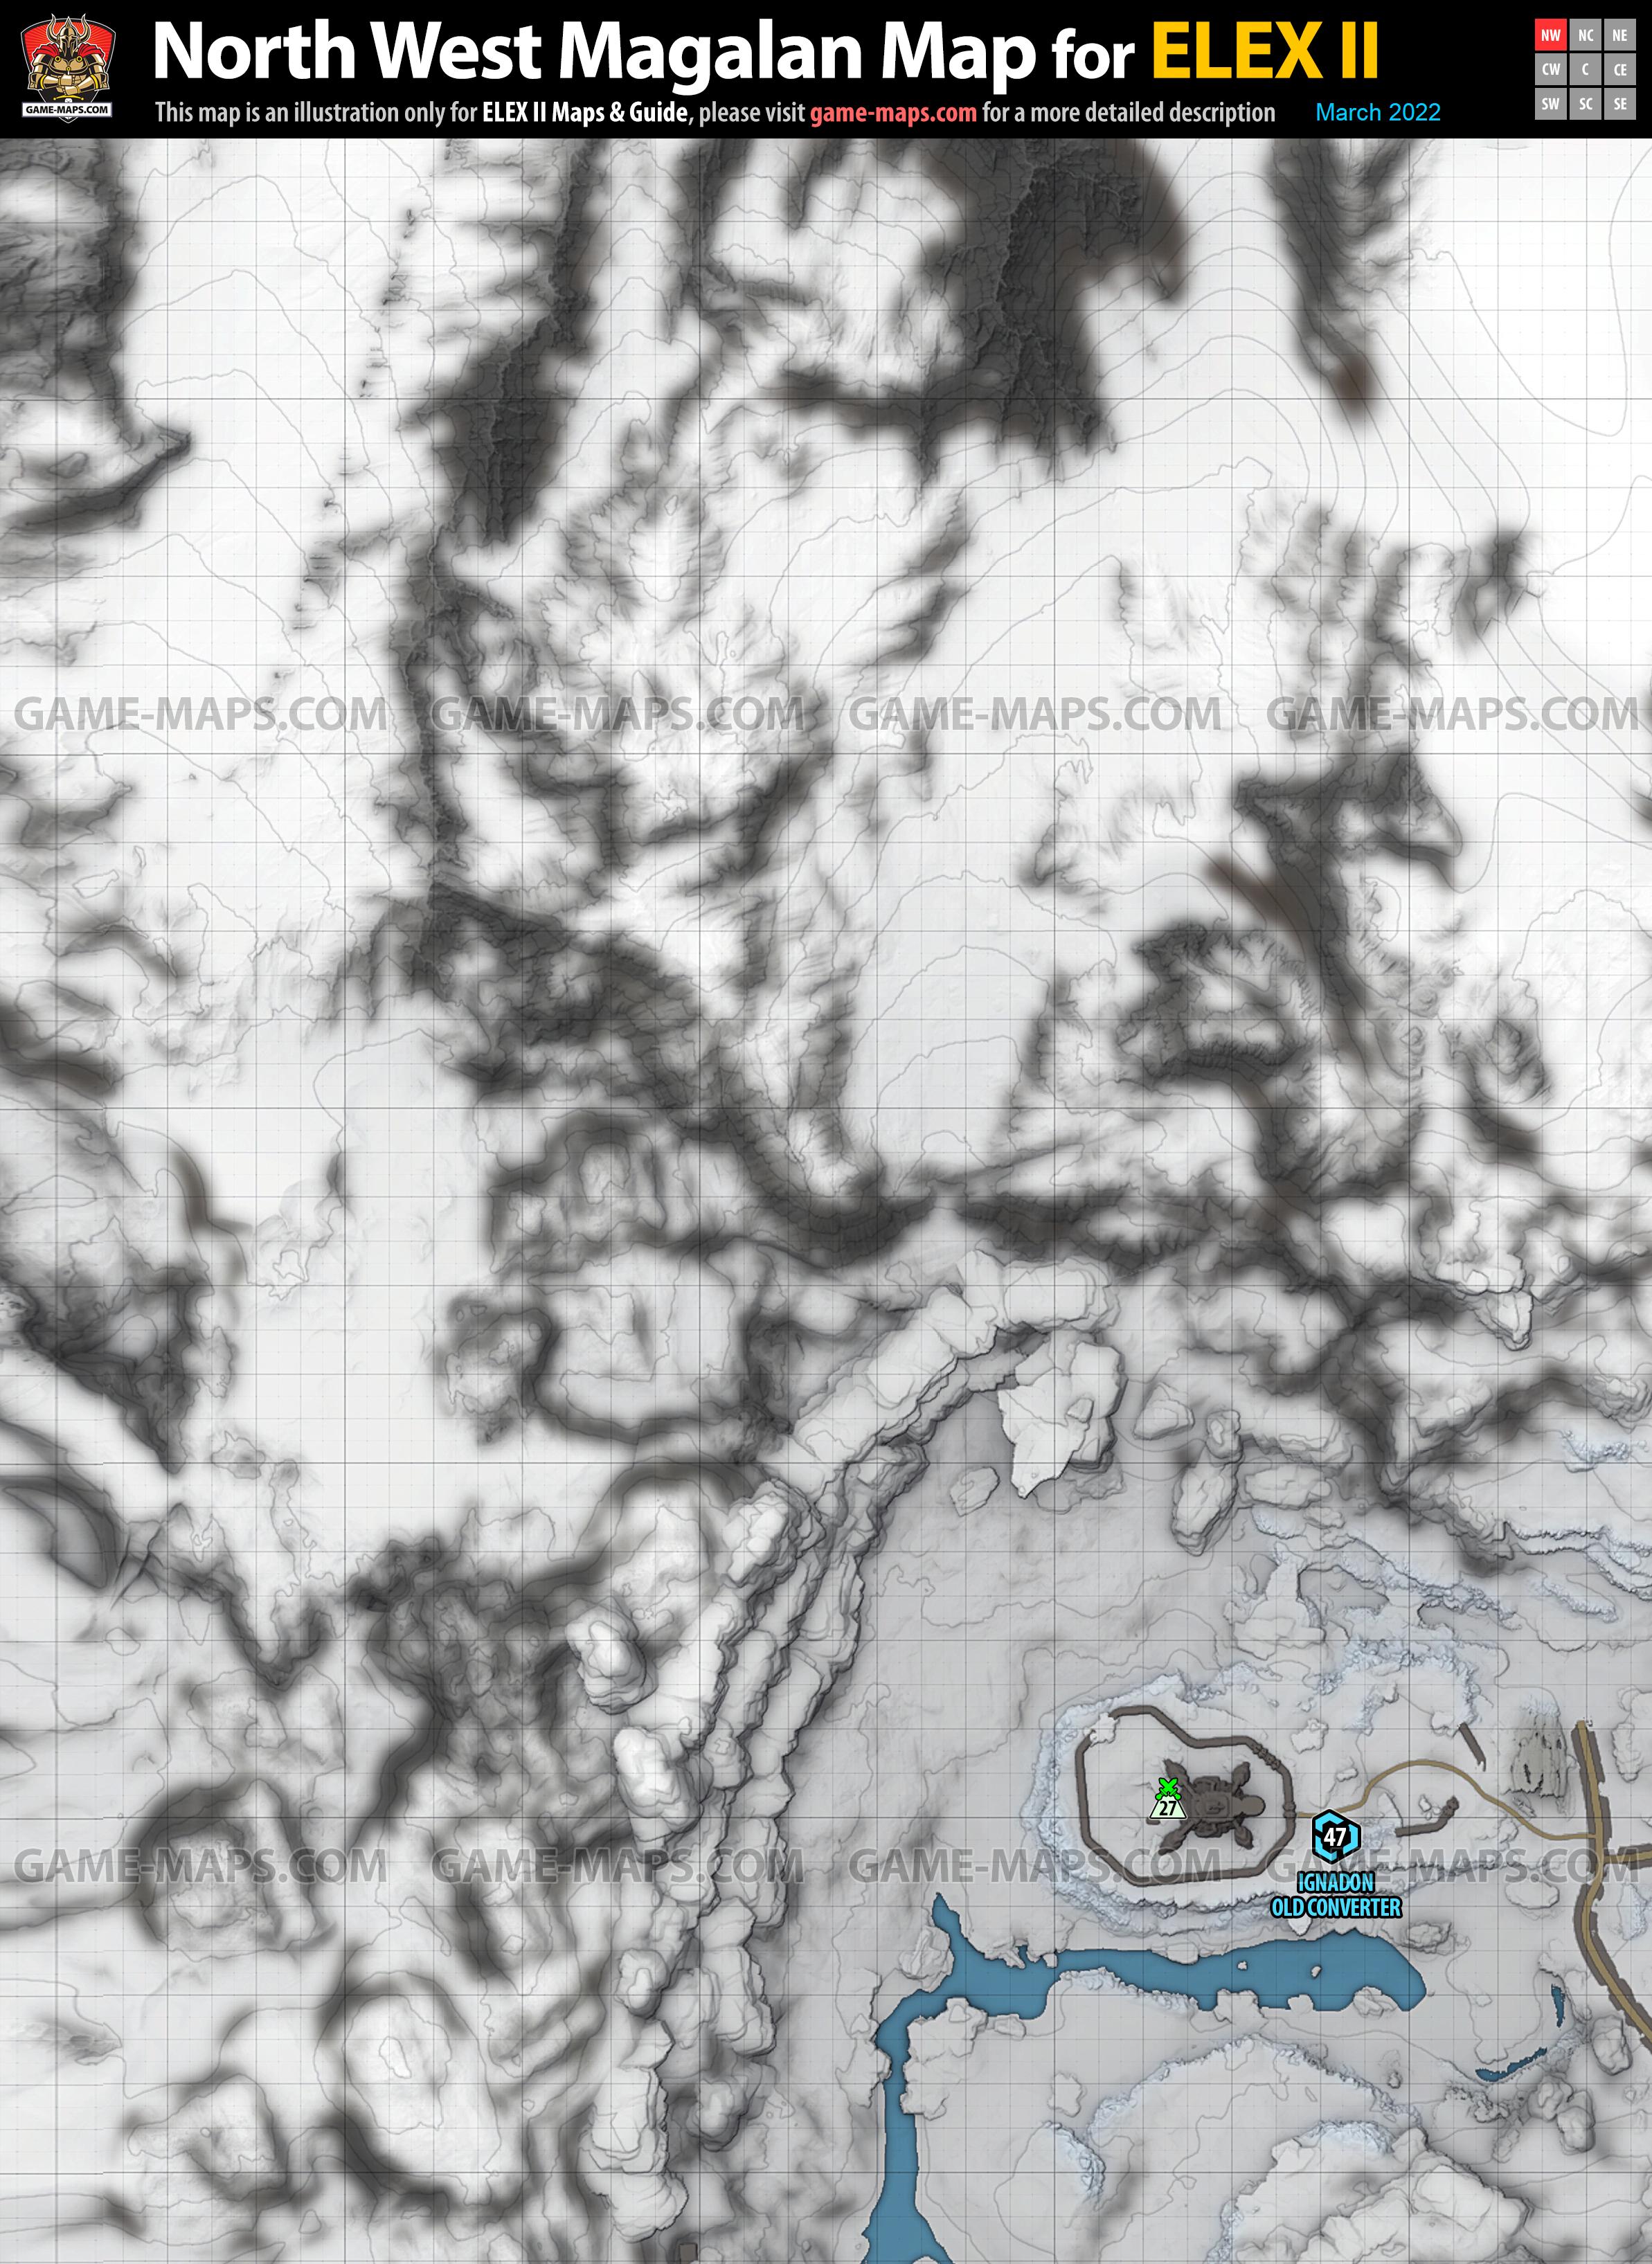 North West Magalan Map for ELEX II